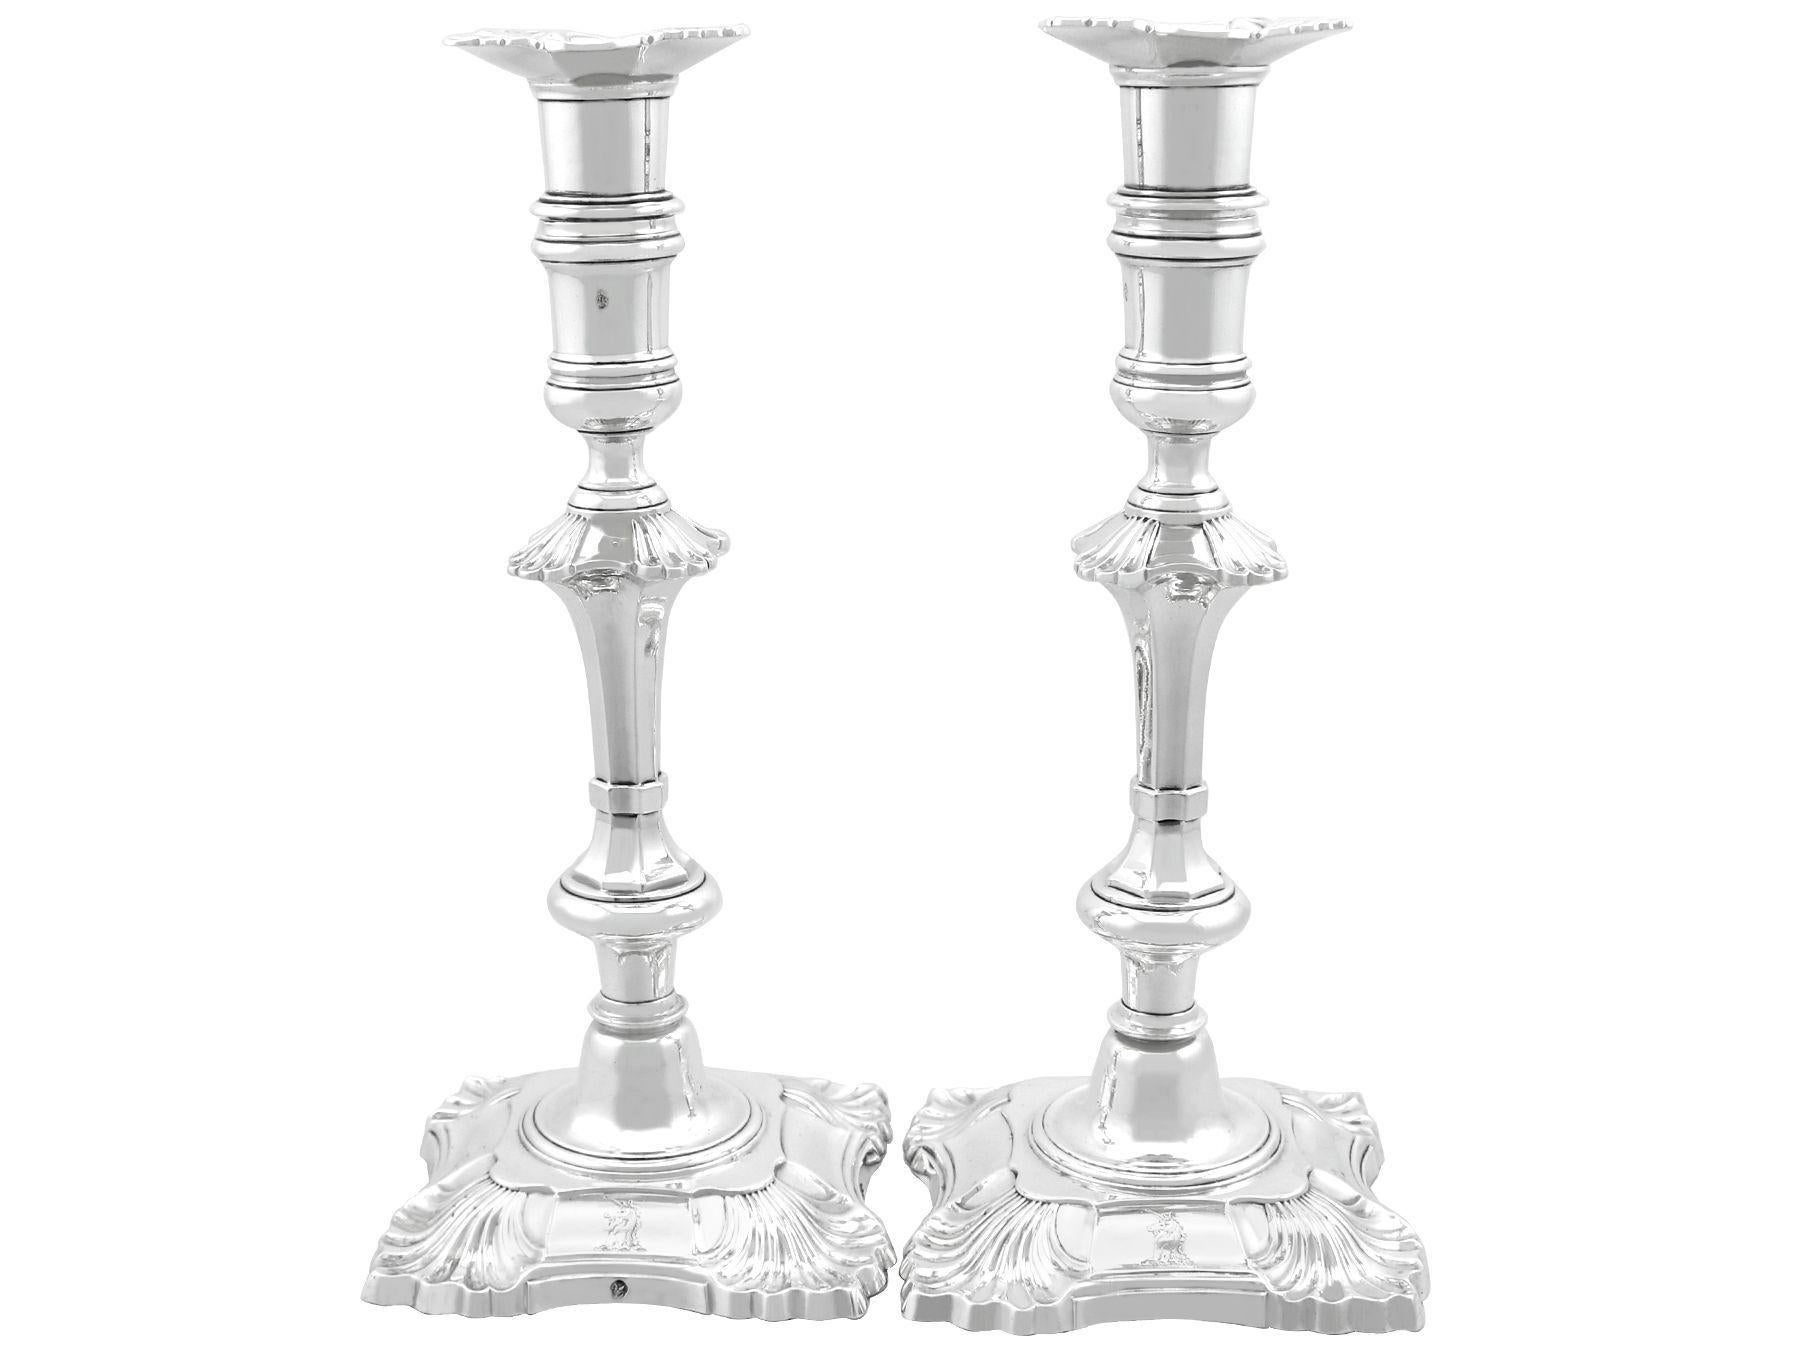 A magnificent, fine and impressive pair of antique Irish cast sterling silver candlesticks; an addition of our ornamental silverware collection.

These exceptional antique cast Irish silver candlesticks, in sterling standard, have a plain